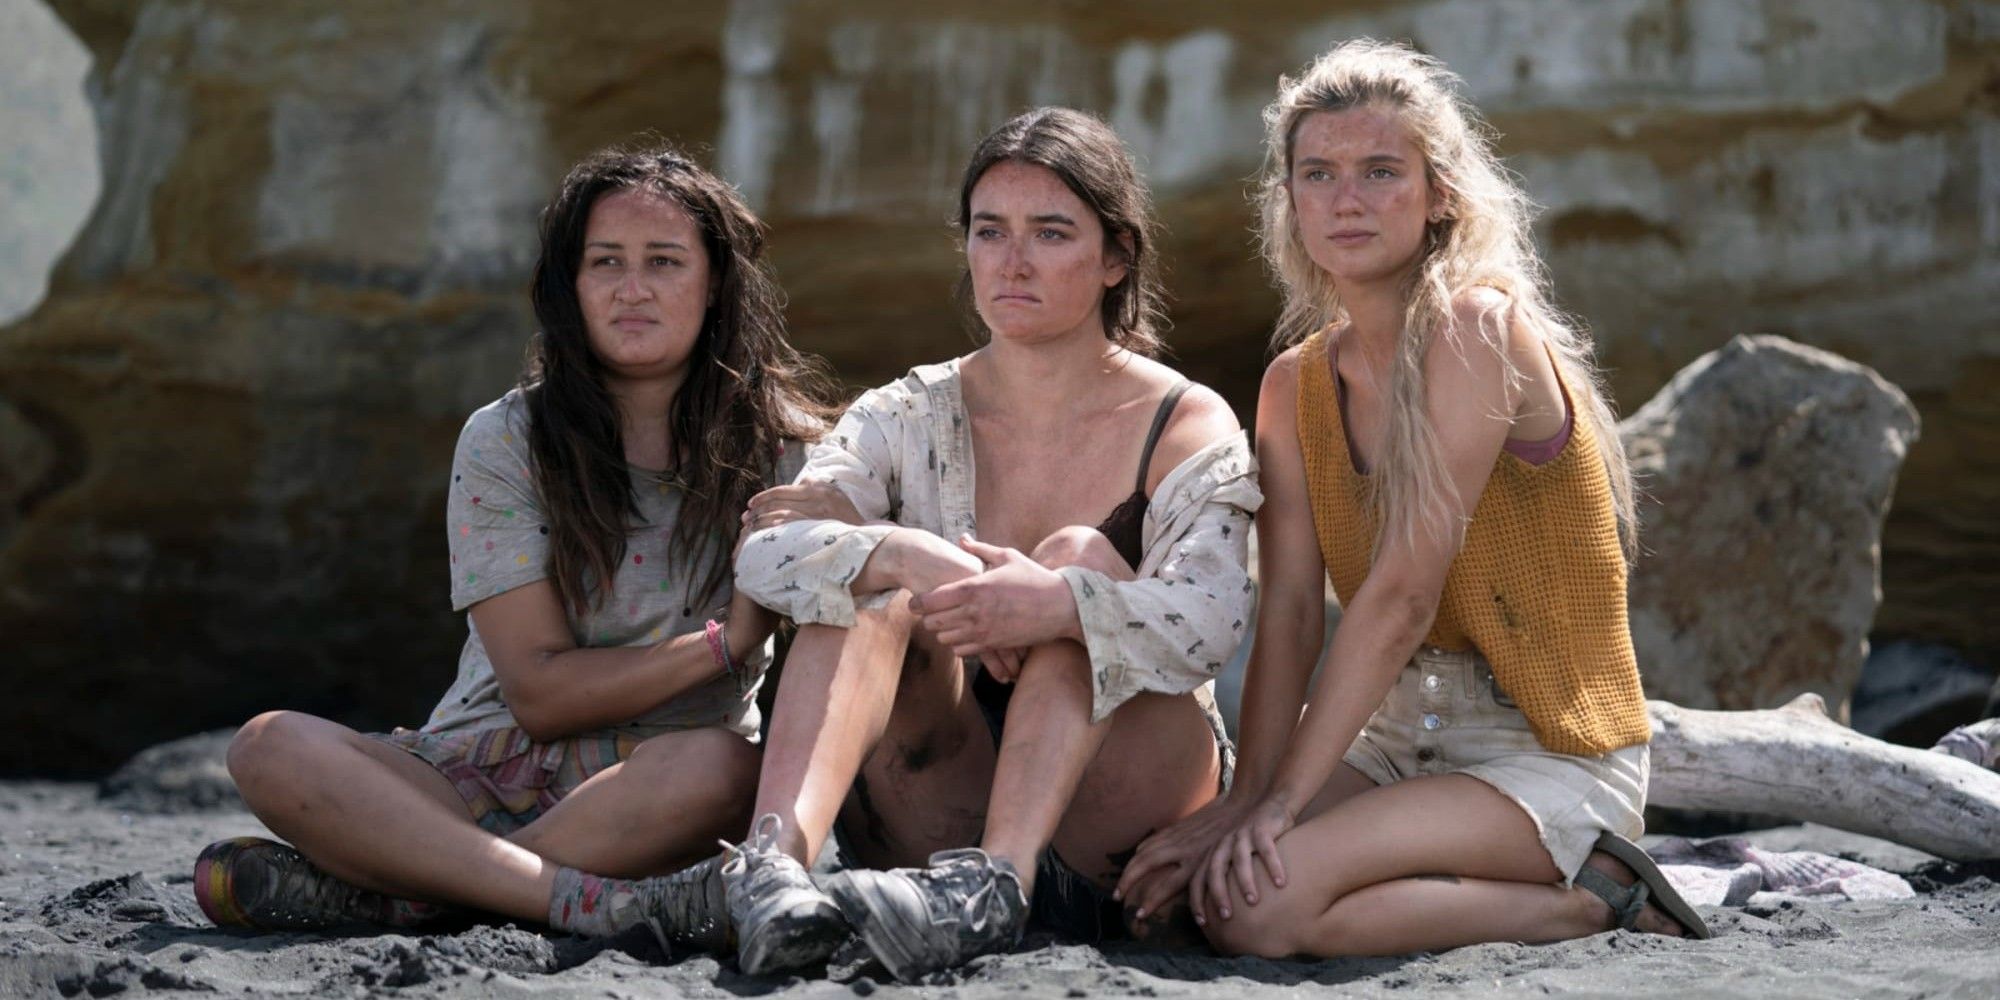 Three girls from The Wilds sitting on the island, looking dirty and upset.